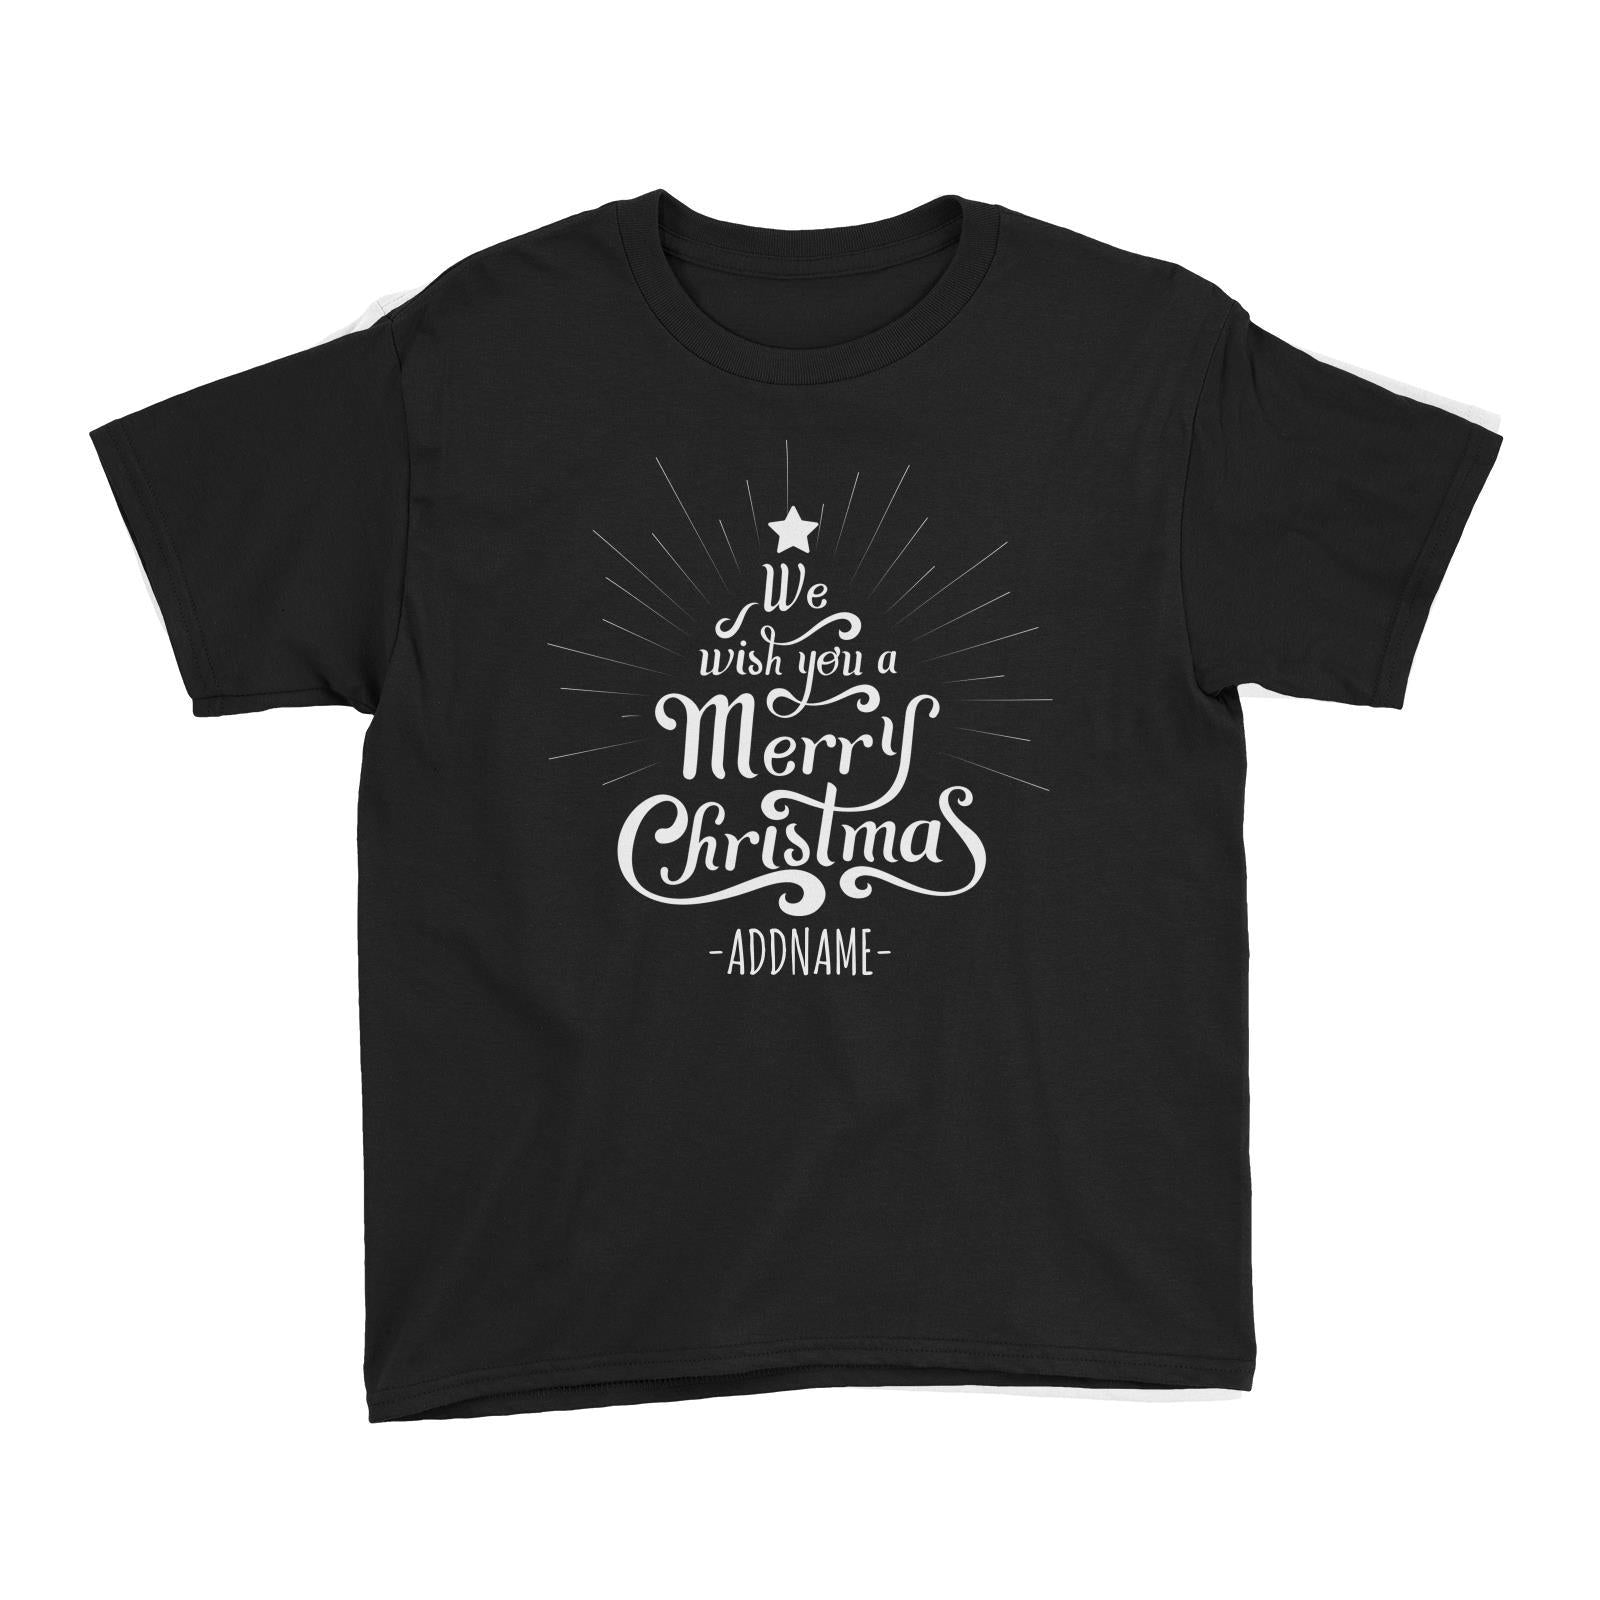 We Wish You A Merry Christmas Greeting Addname Kid's T-Shirt  Personalizable Designs Lettering Matching Family